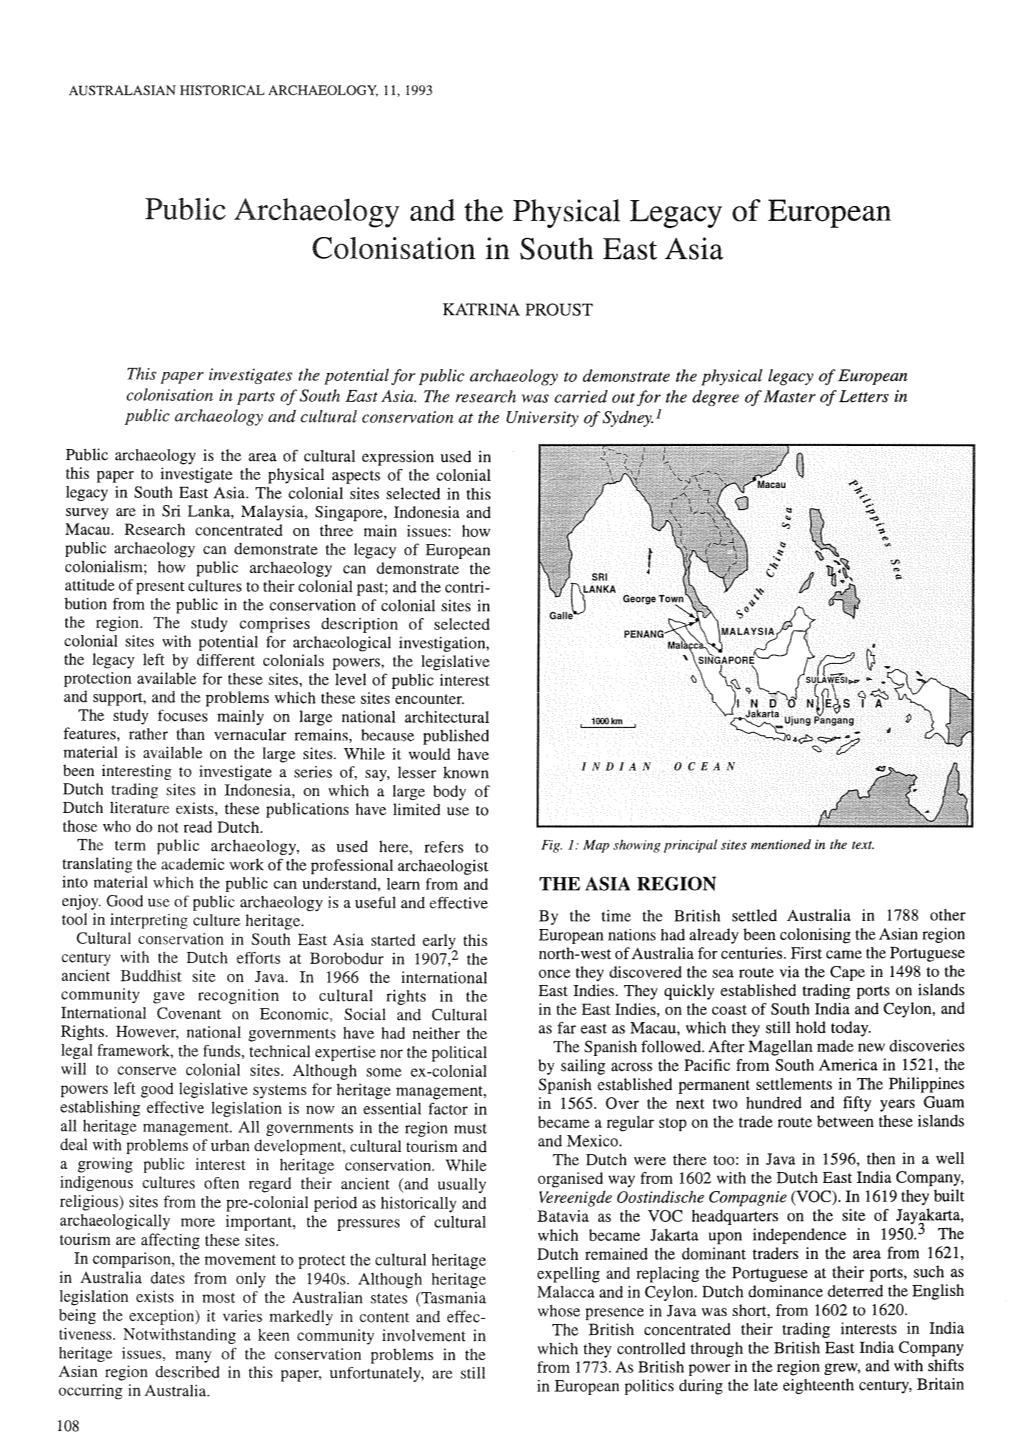 Public Archaeology and the Physical Legacy of European Colonisation in South East Asia